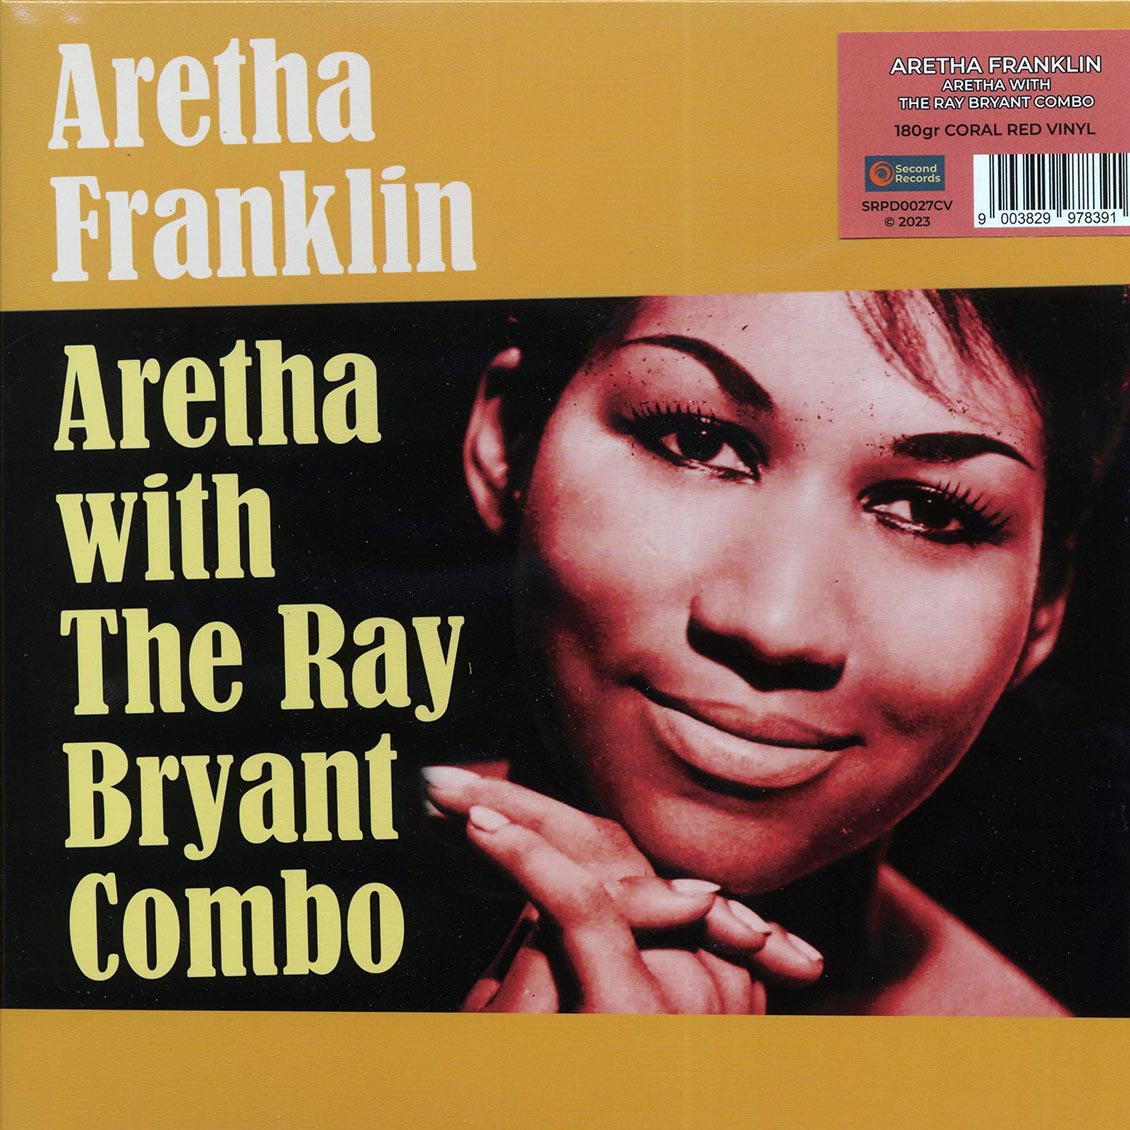 Aretha Franklin - Aretha With The Ray Bryant Combo (180g) (red vinyl) - Vinyl LP